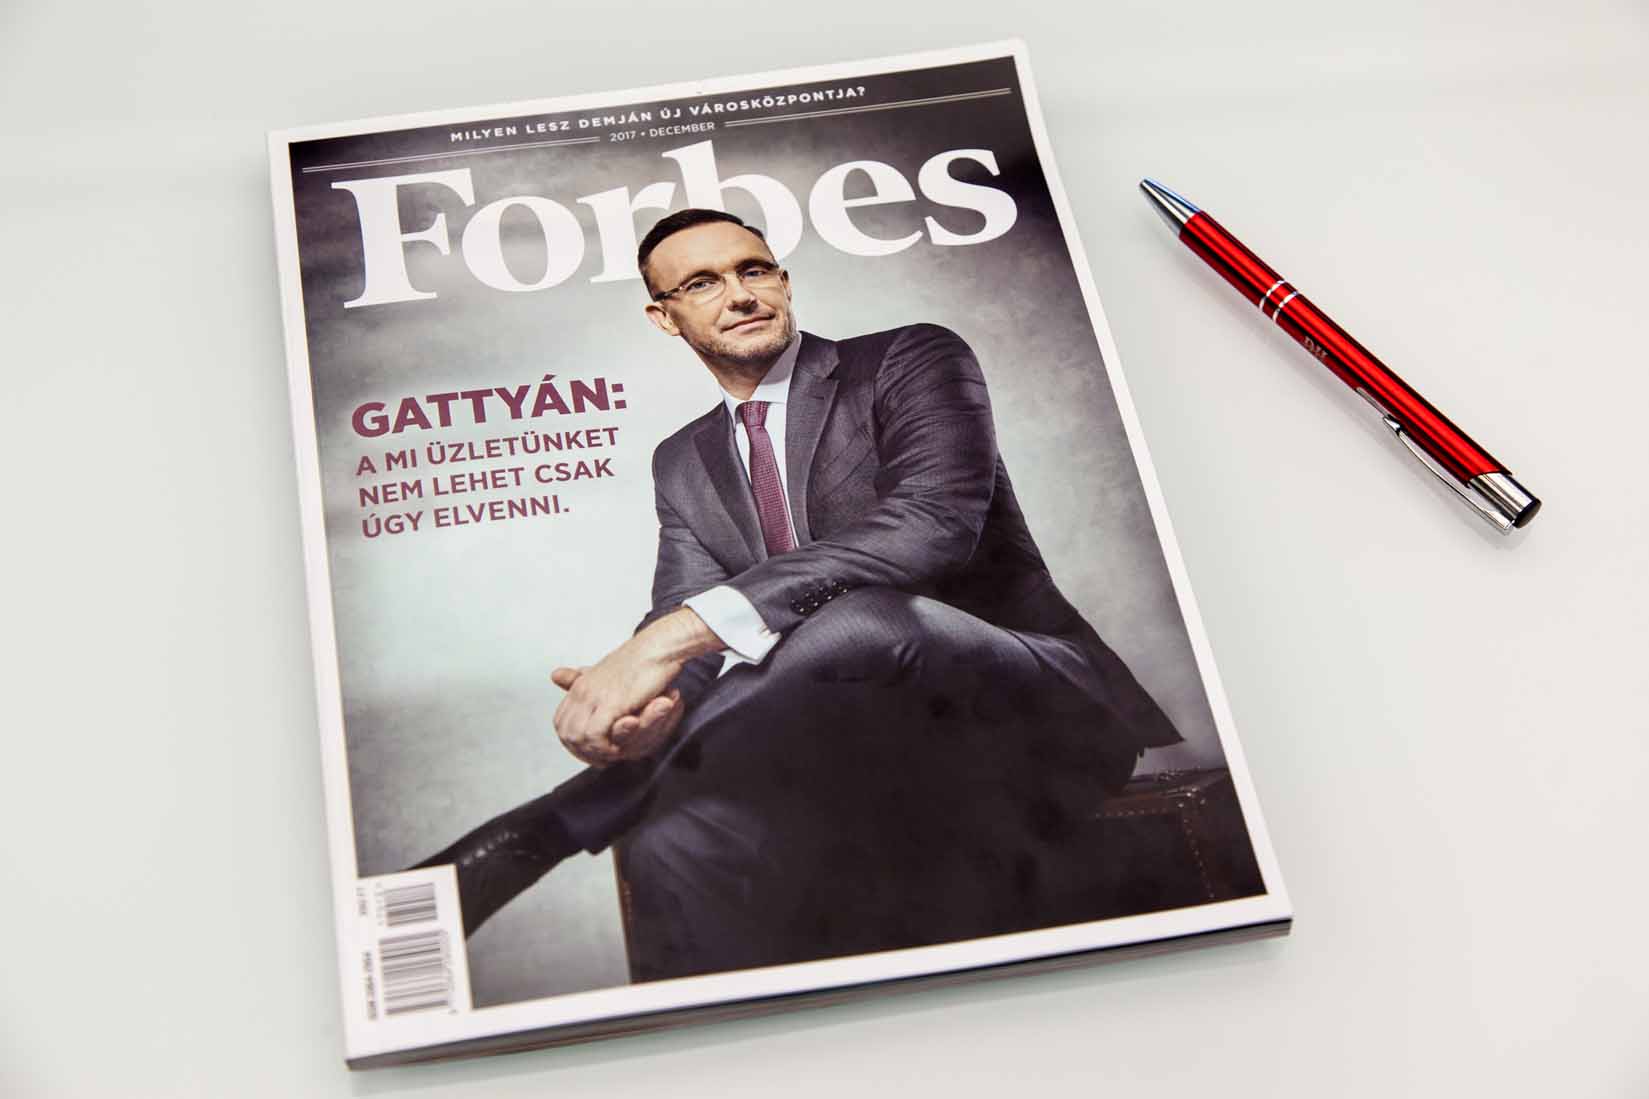 Docler Holding founder is featured on the cover of Forbes Hungary